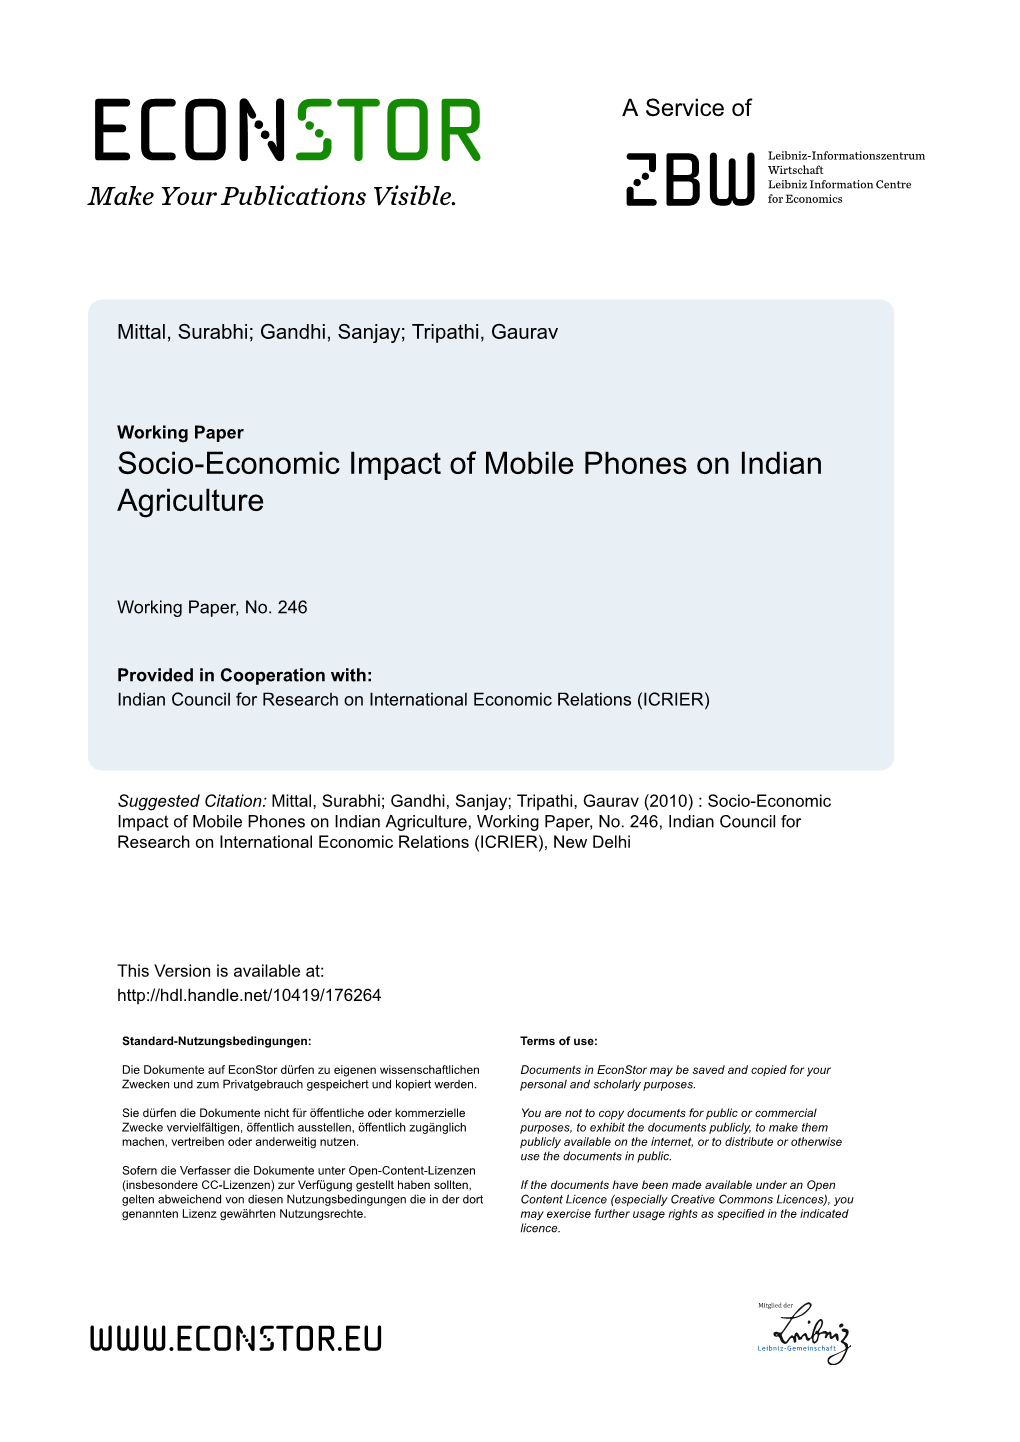 Socio-Economic Impact of Mobile Phones on Indian Agriculture